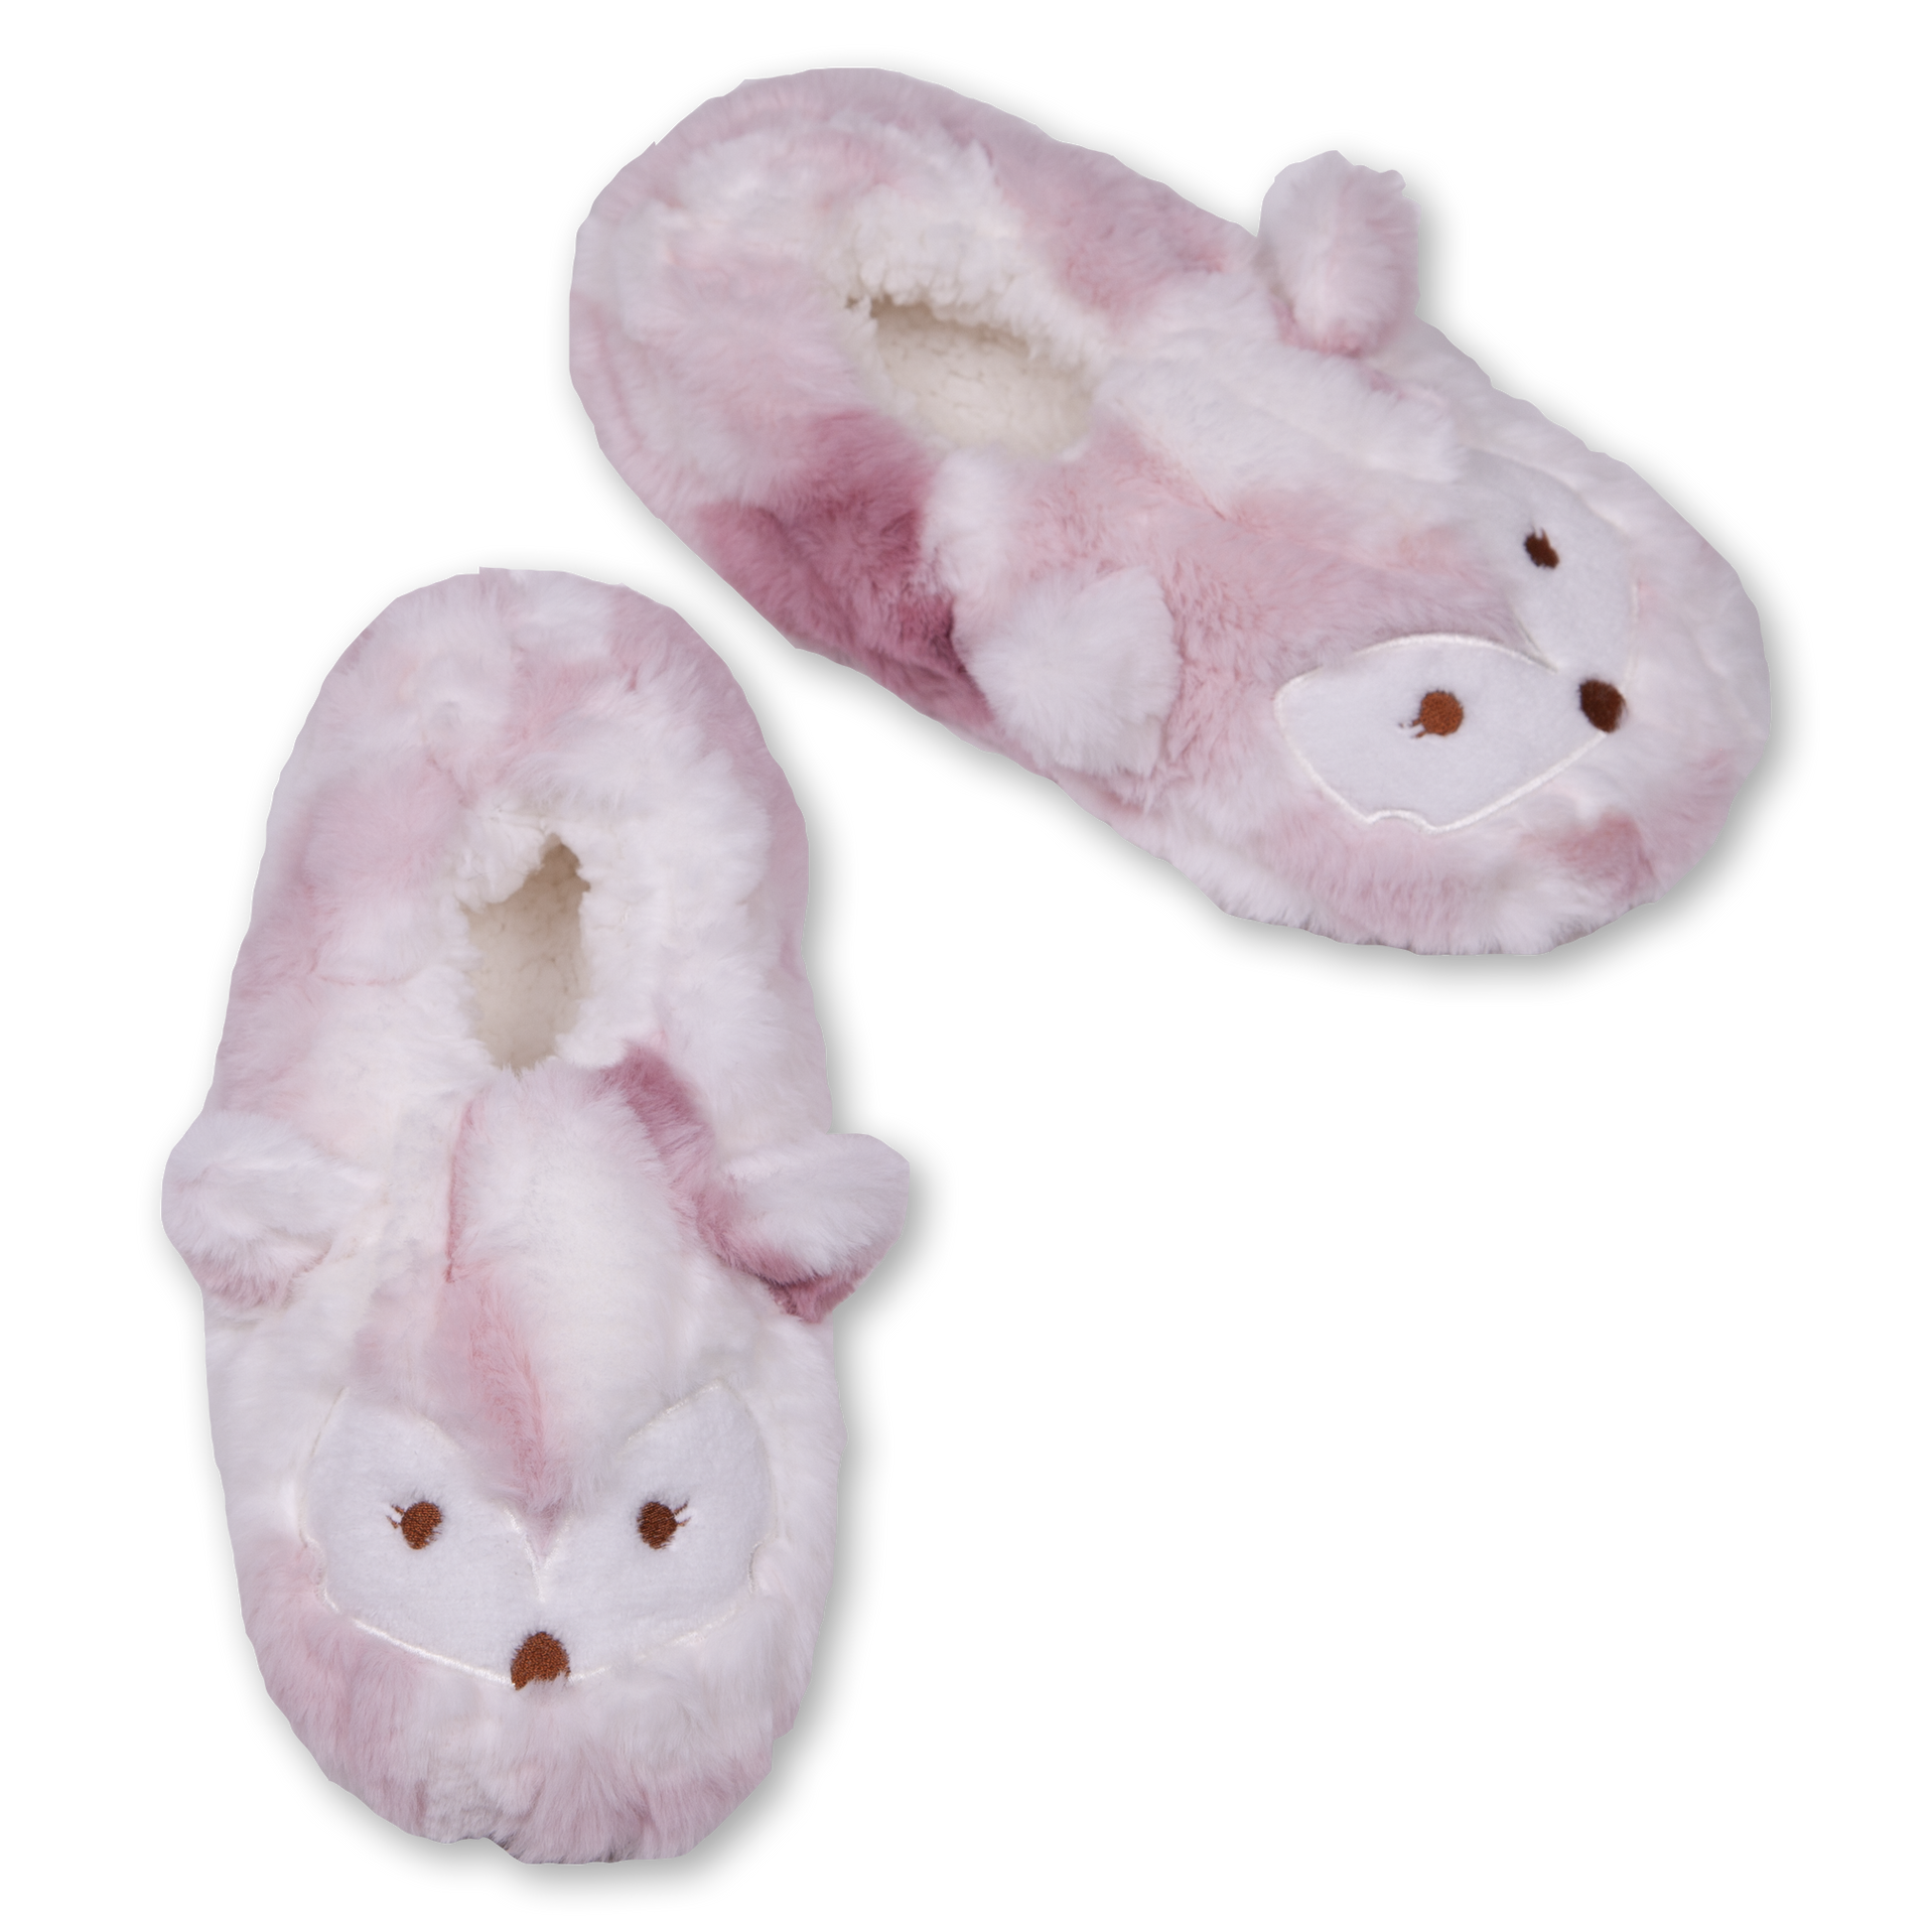 Happy Unhappy Slipper Boots  Furry Pink Monster Slippers